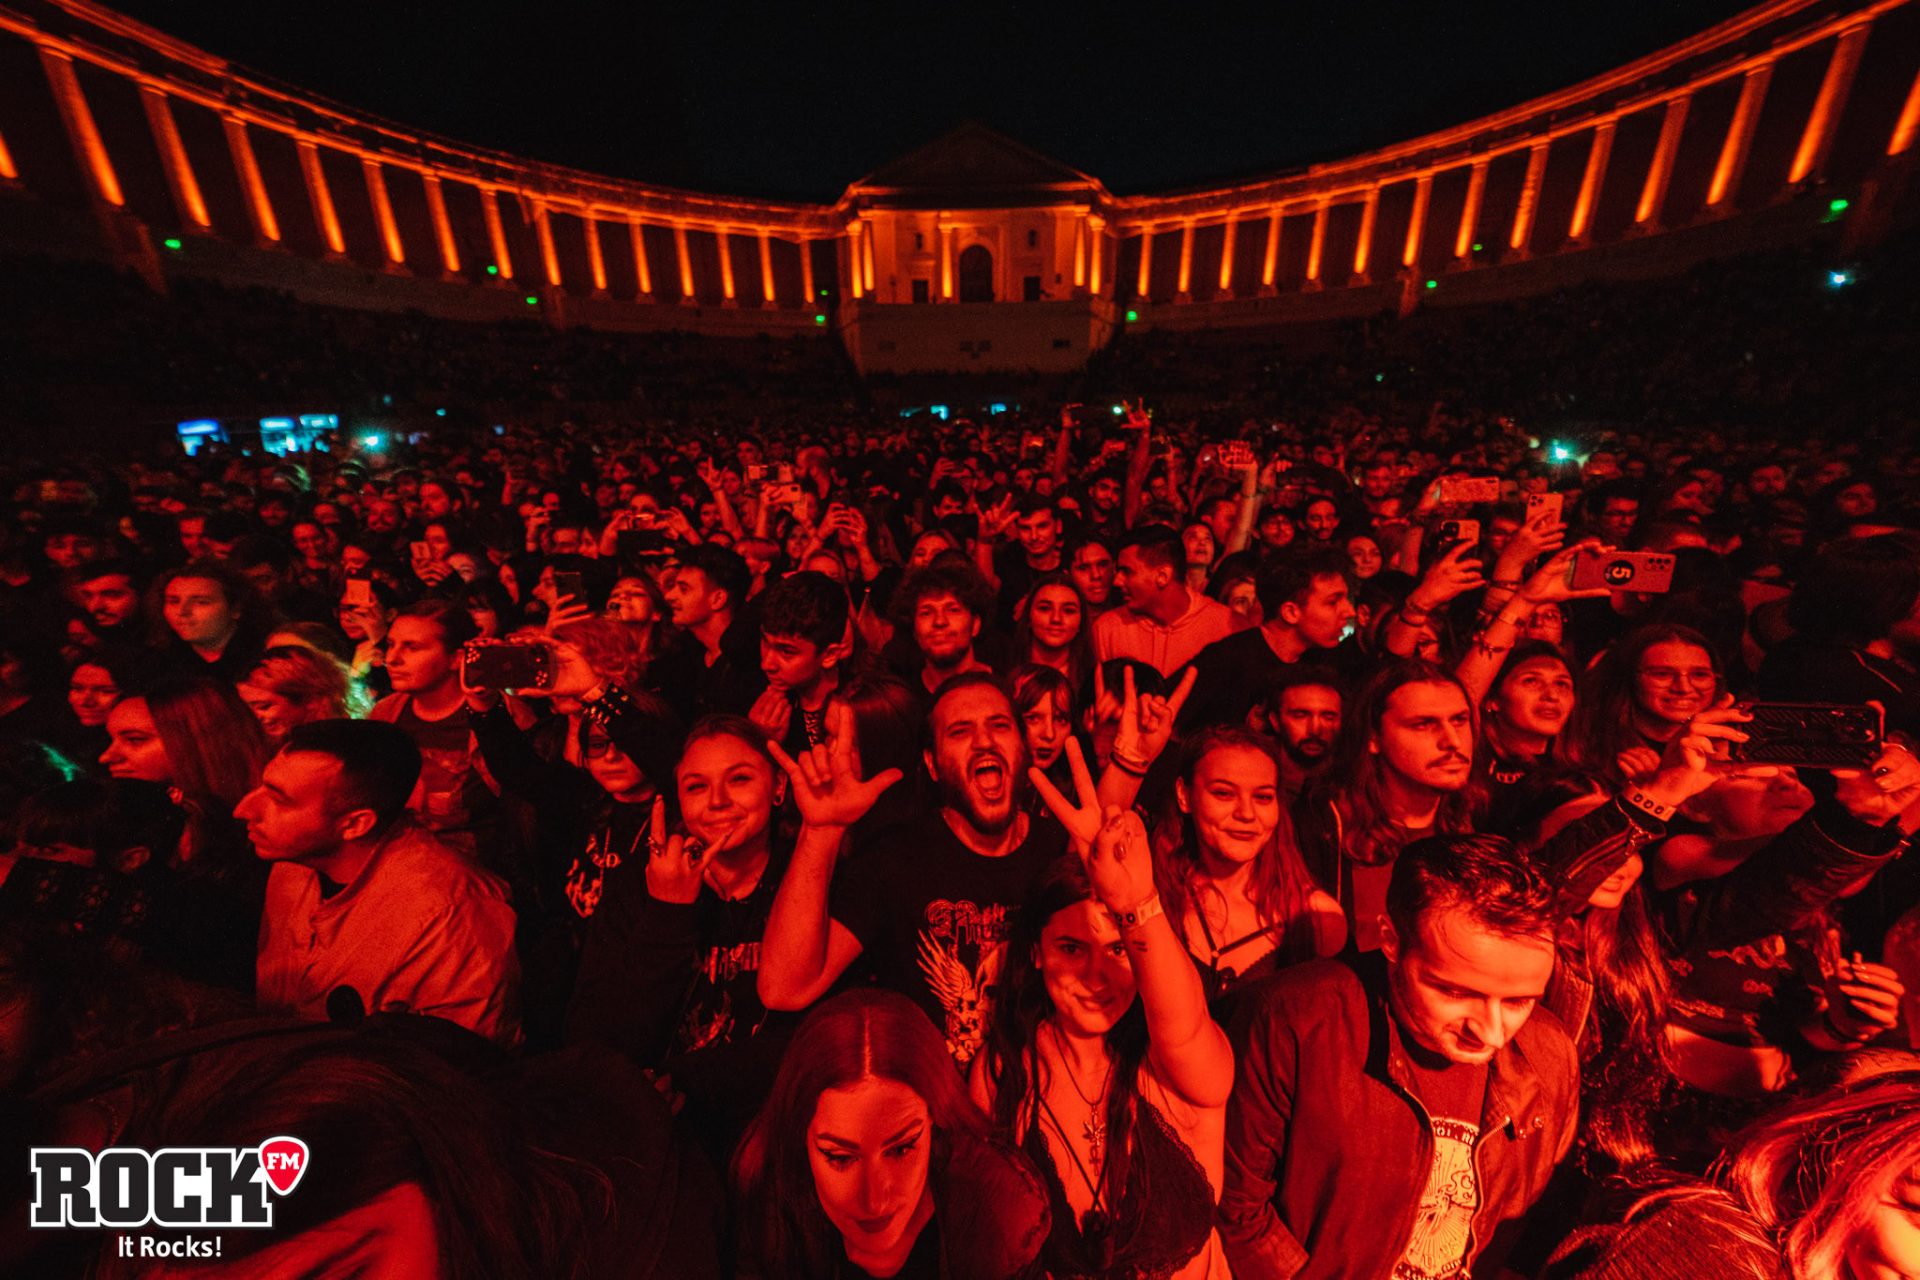 Crowd under the stage of the Arenele Romane in Bucarest (Romania) during the concert held by the Falling Giant